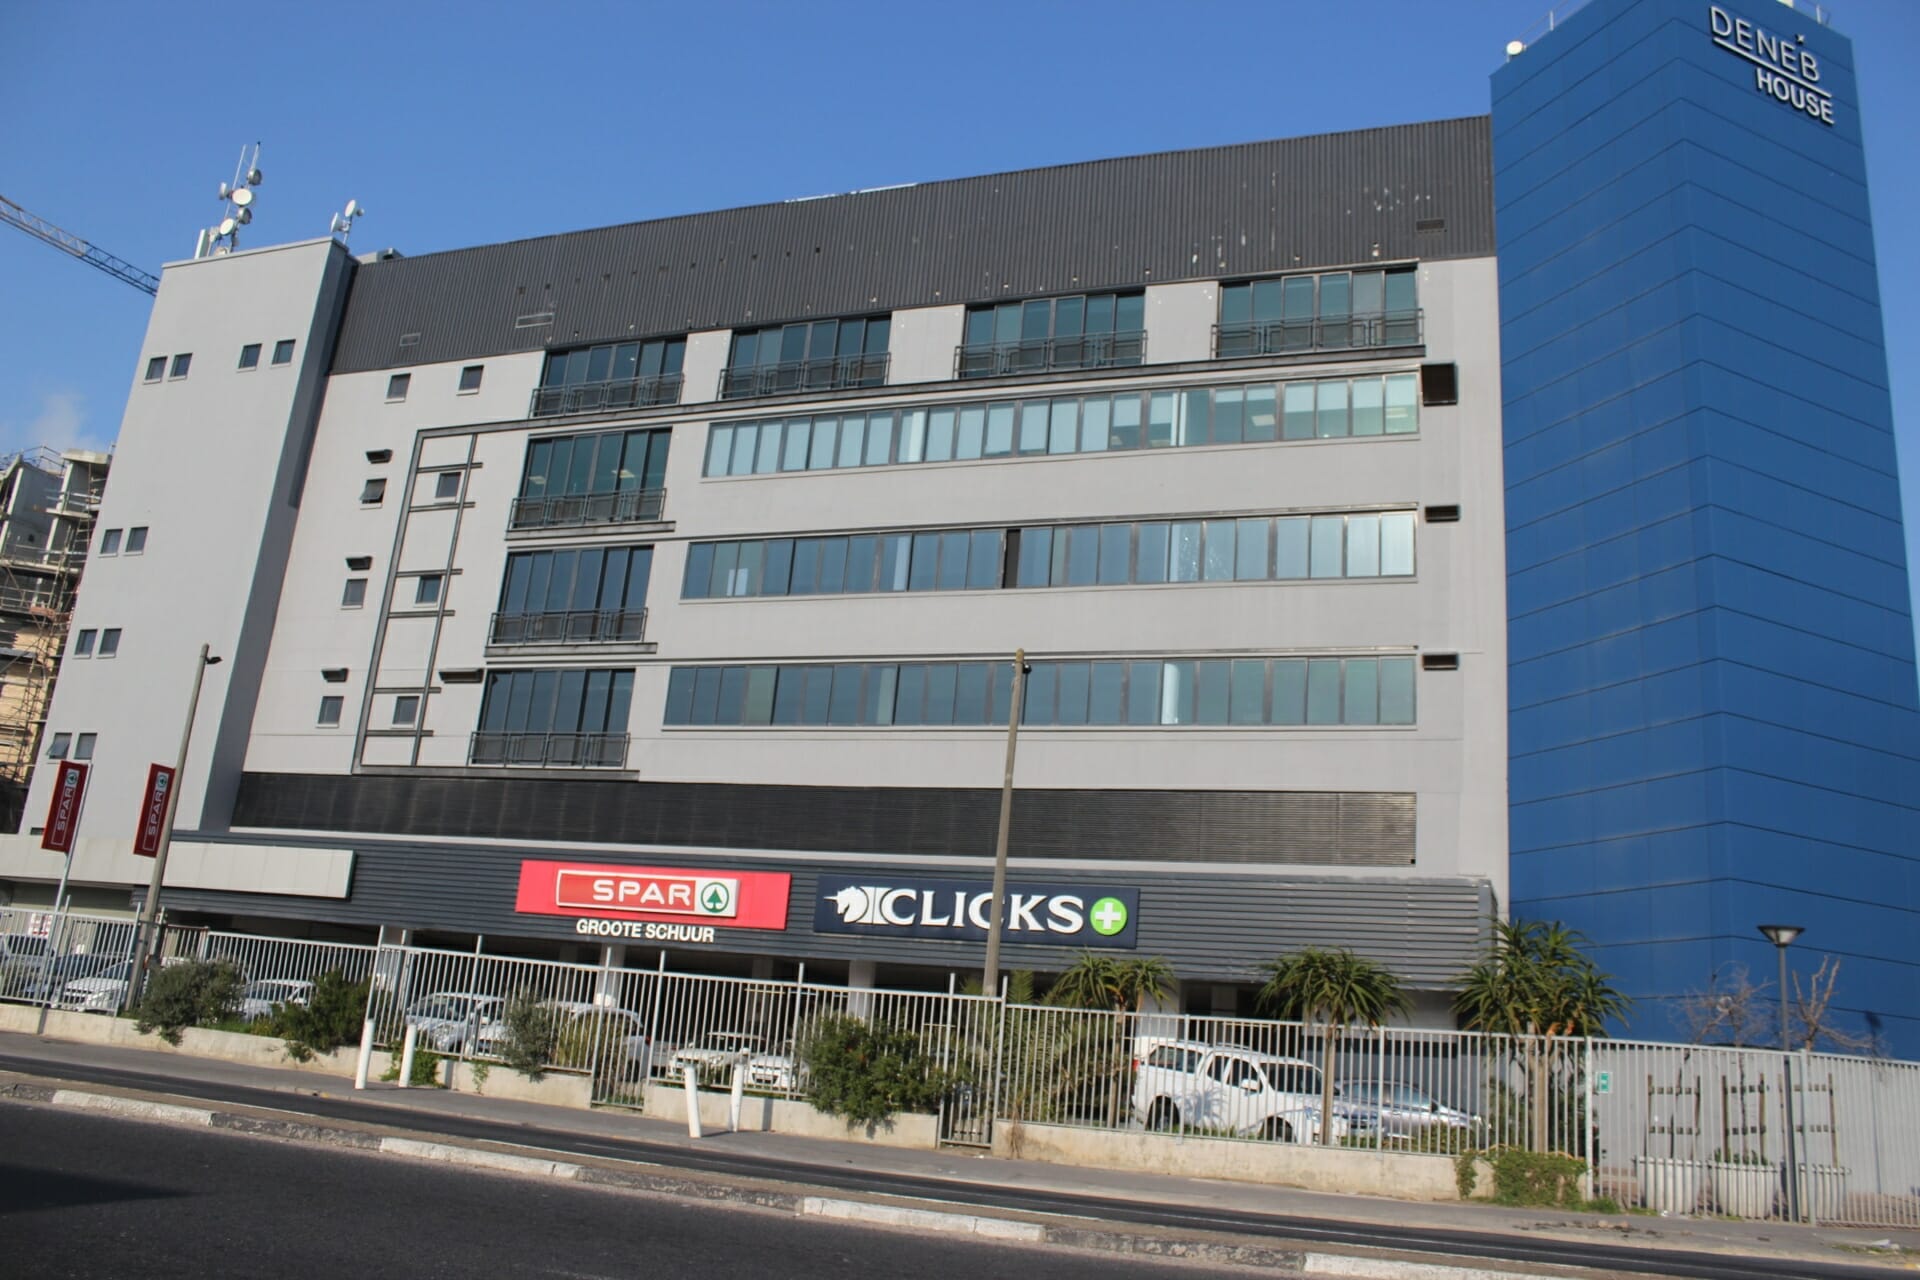 1,137m² – Deneb House 4th floor A Grade office space in Observatory